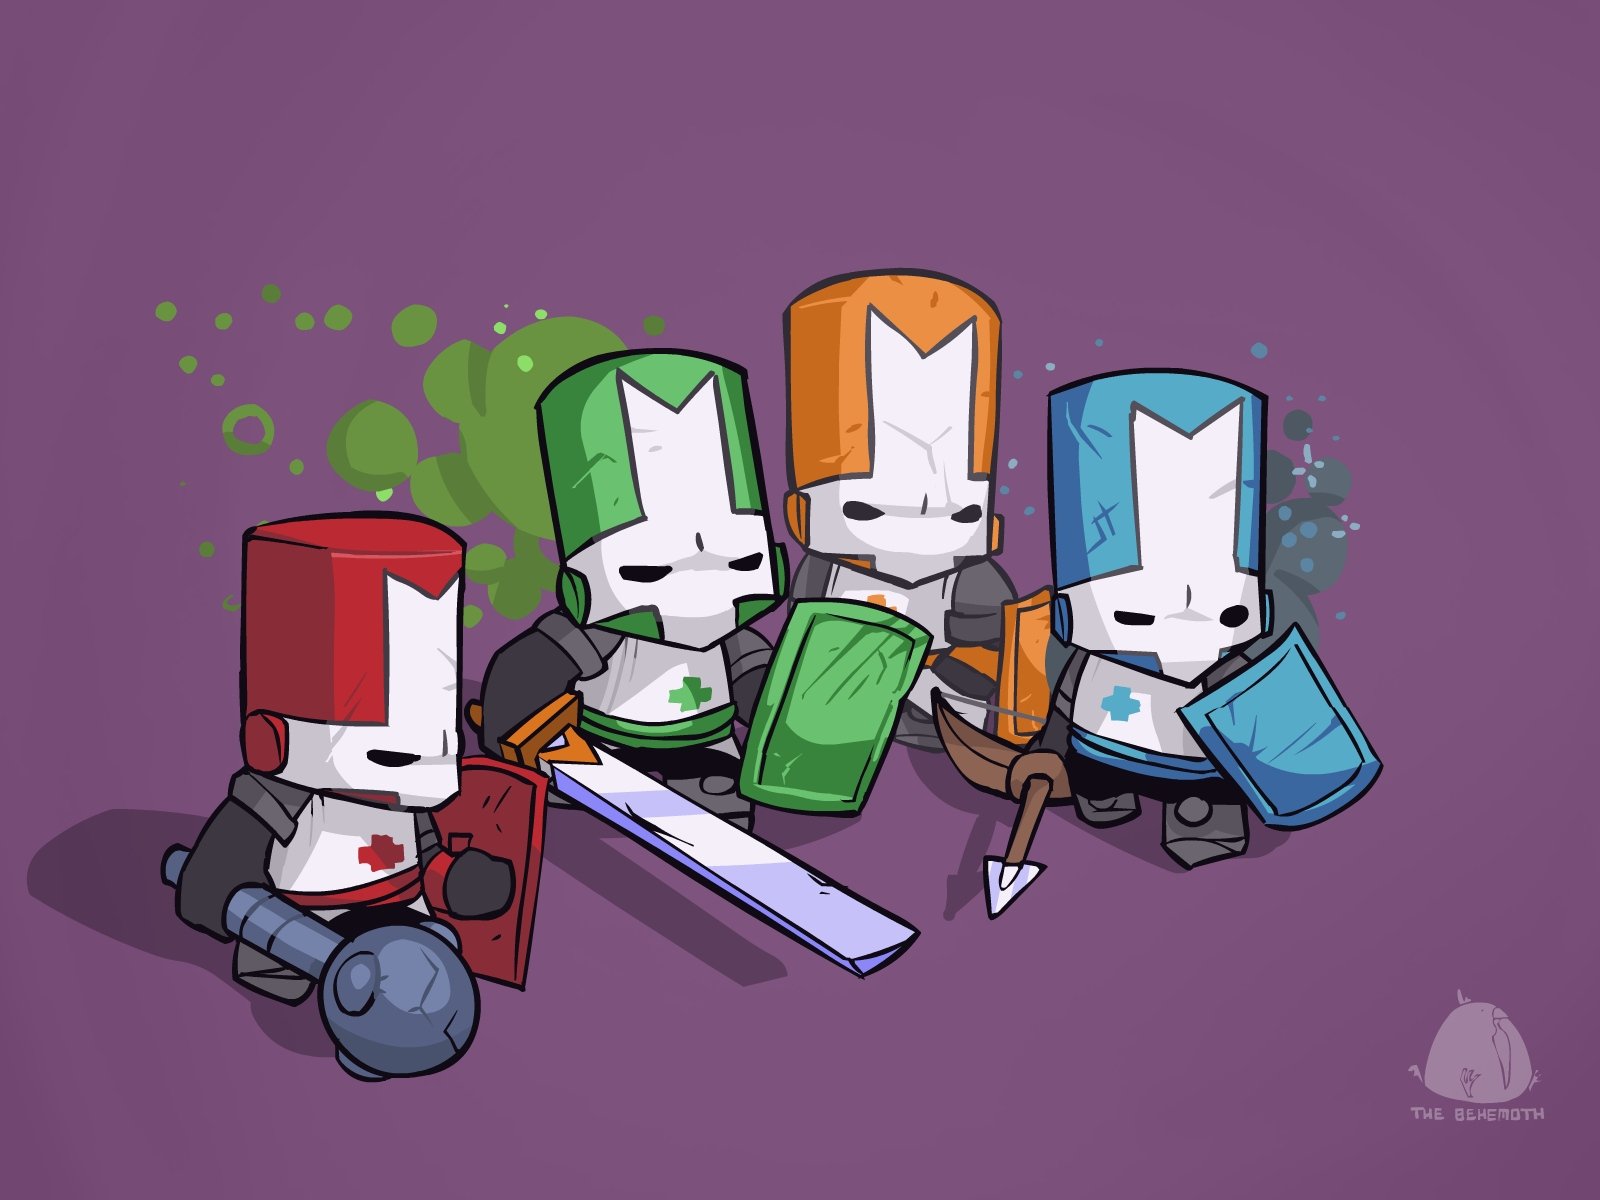 Castle Crashers Wallpaper and Background Image | 1600x1200 | ID:47856